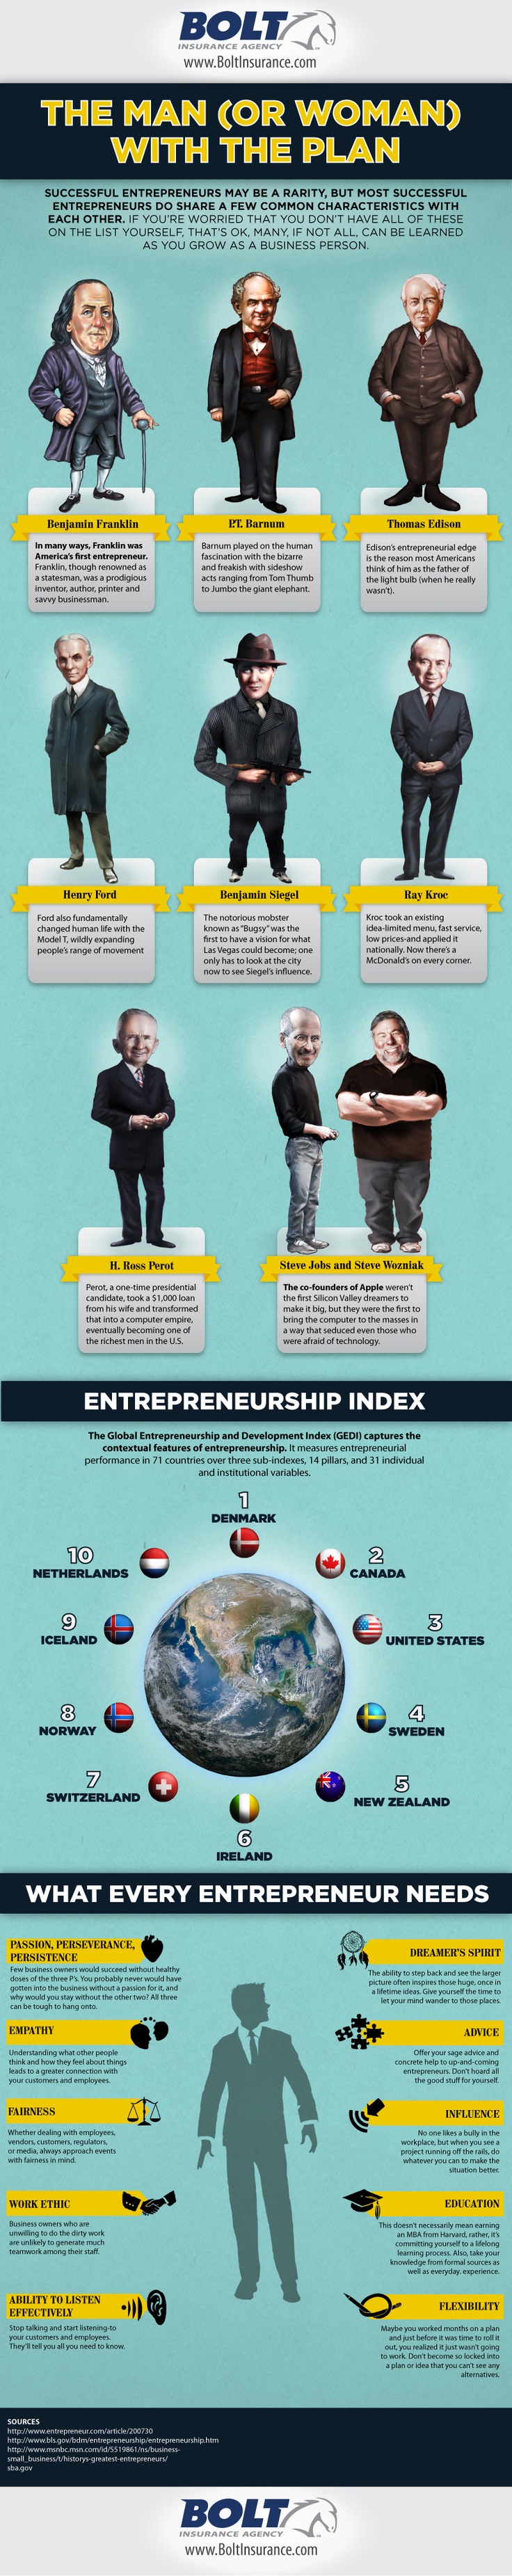 Most Successful Entrepreneurs in History